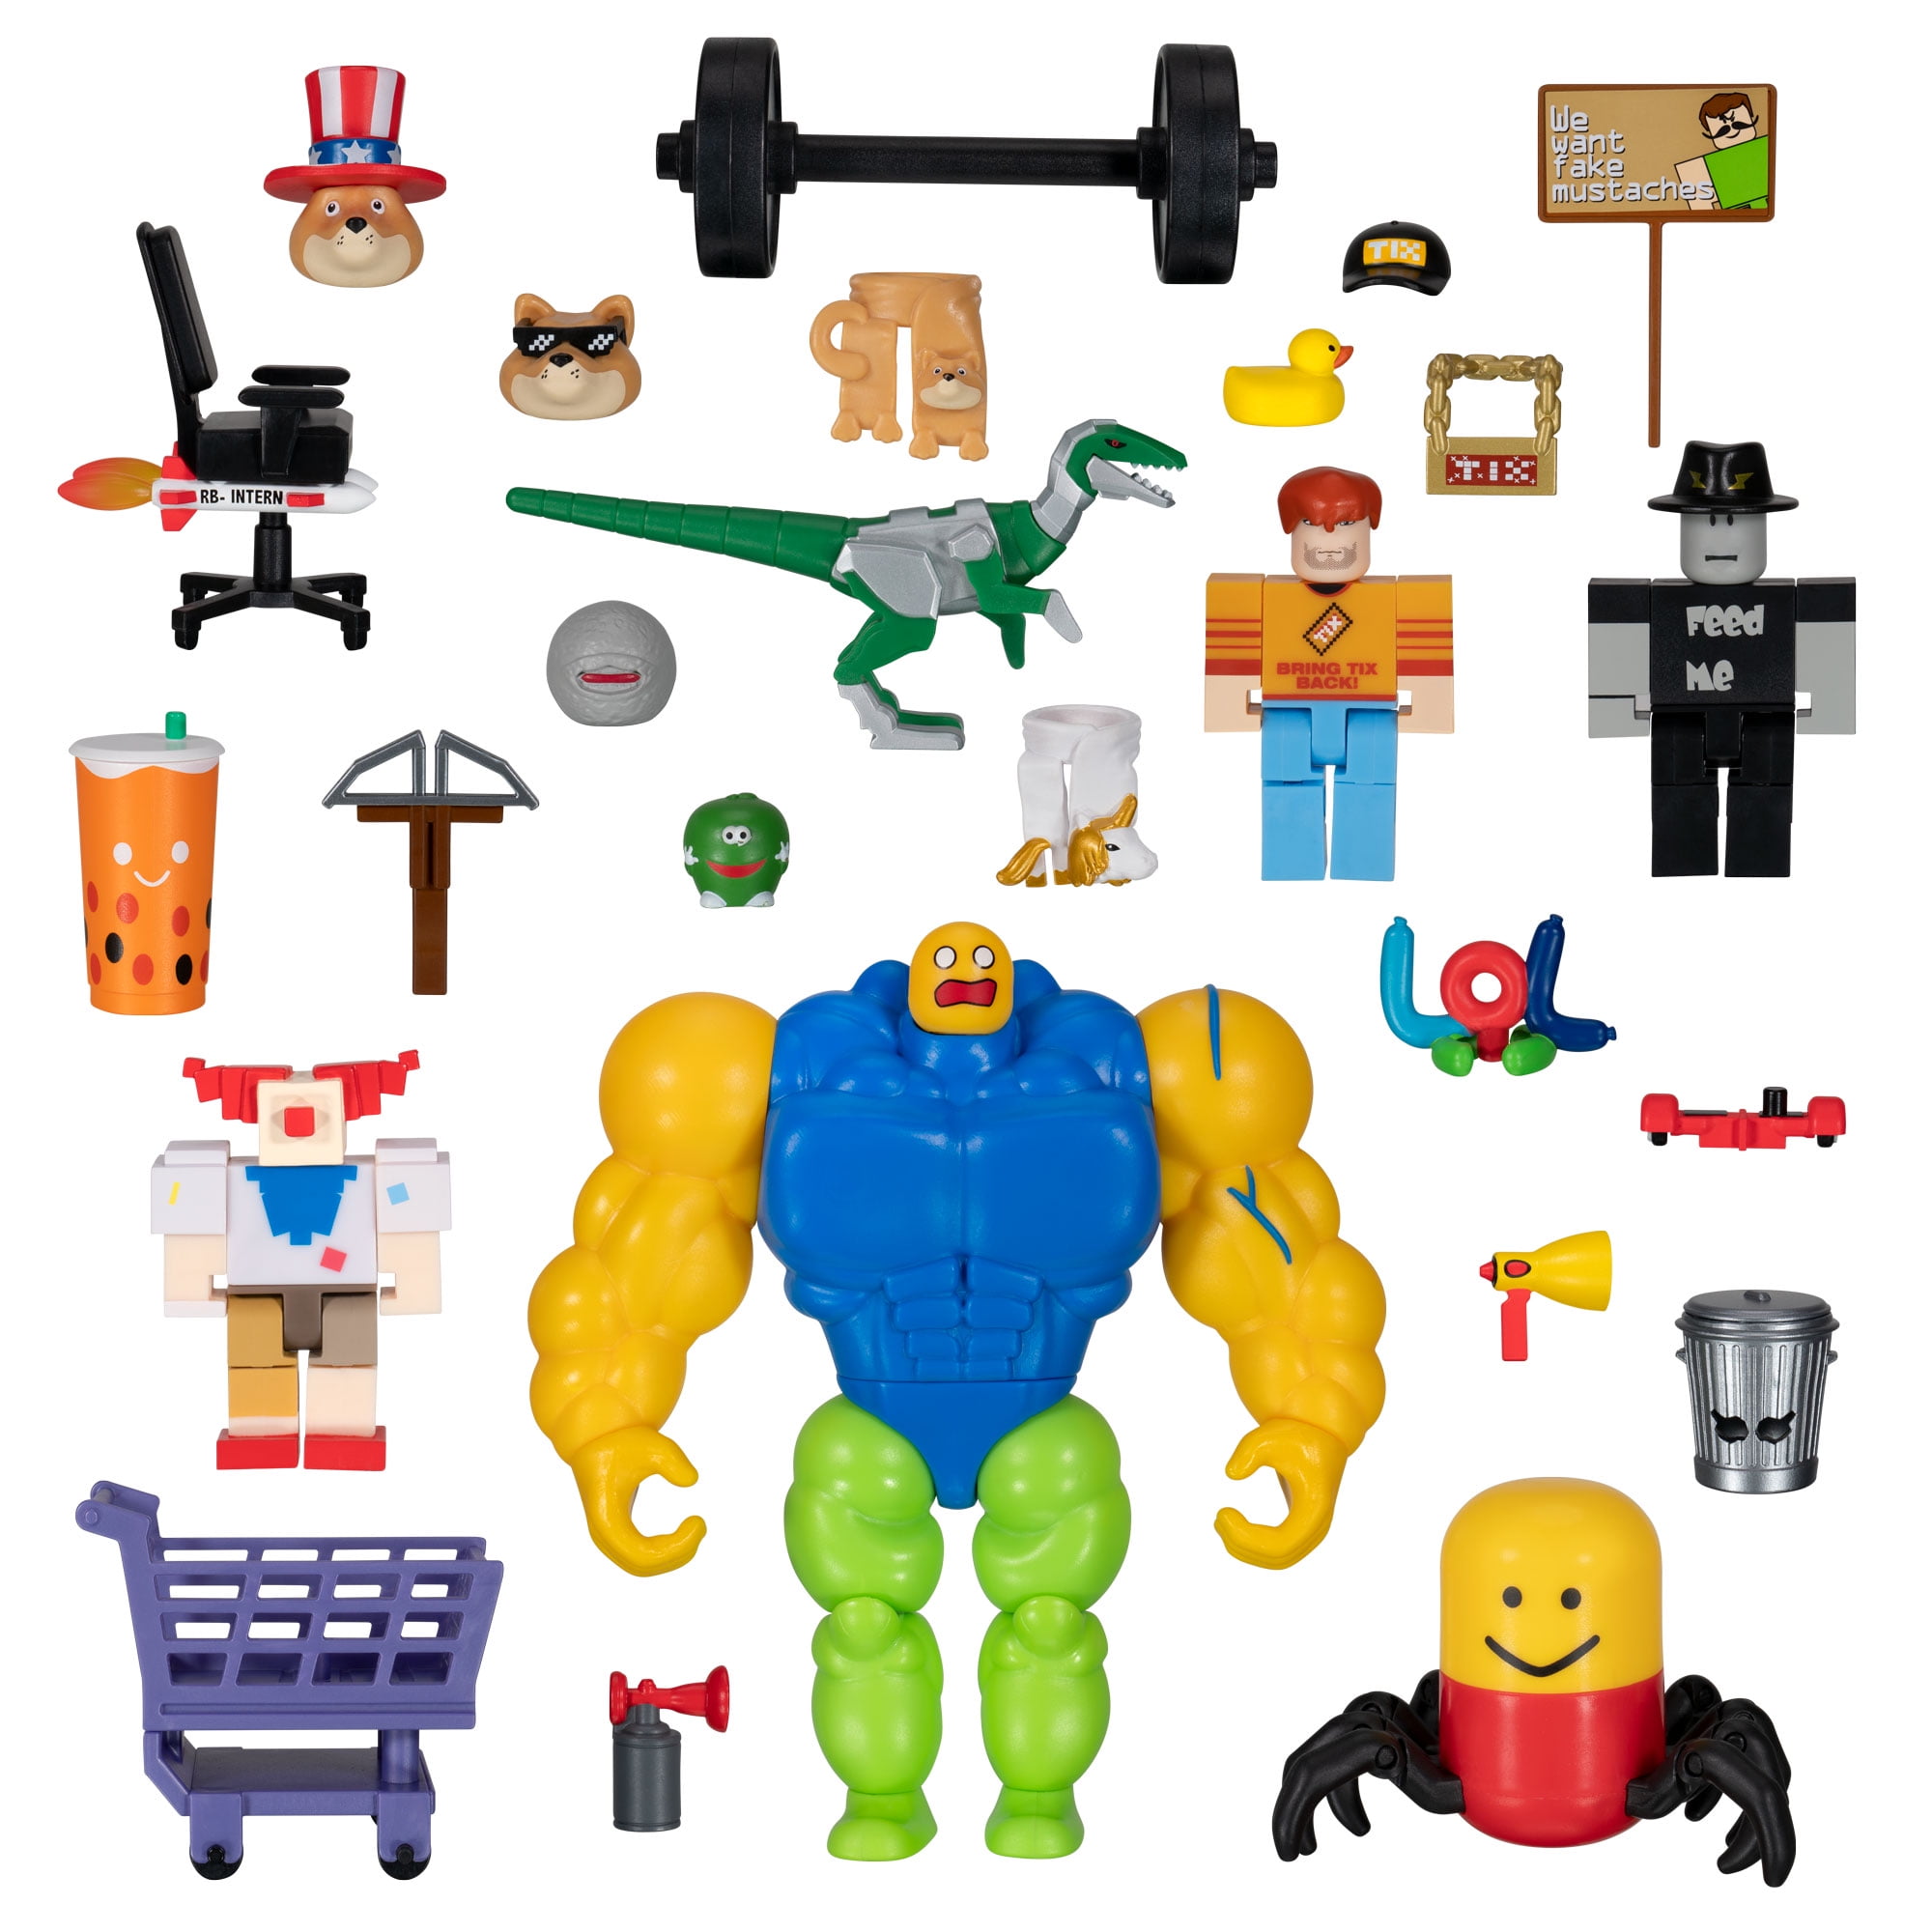 Roblox Action Collection Meme Pack Playset Includes Exclusive Virtual Item Walmart Com Walmart Com - codes for roblox rb world 2 roblox generator on ipad